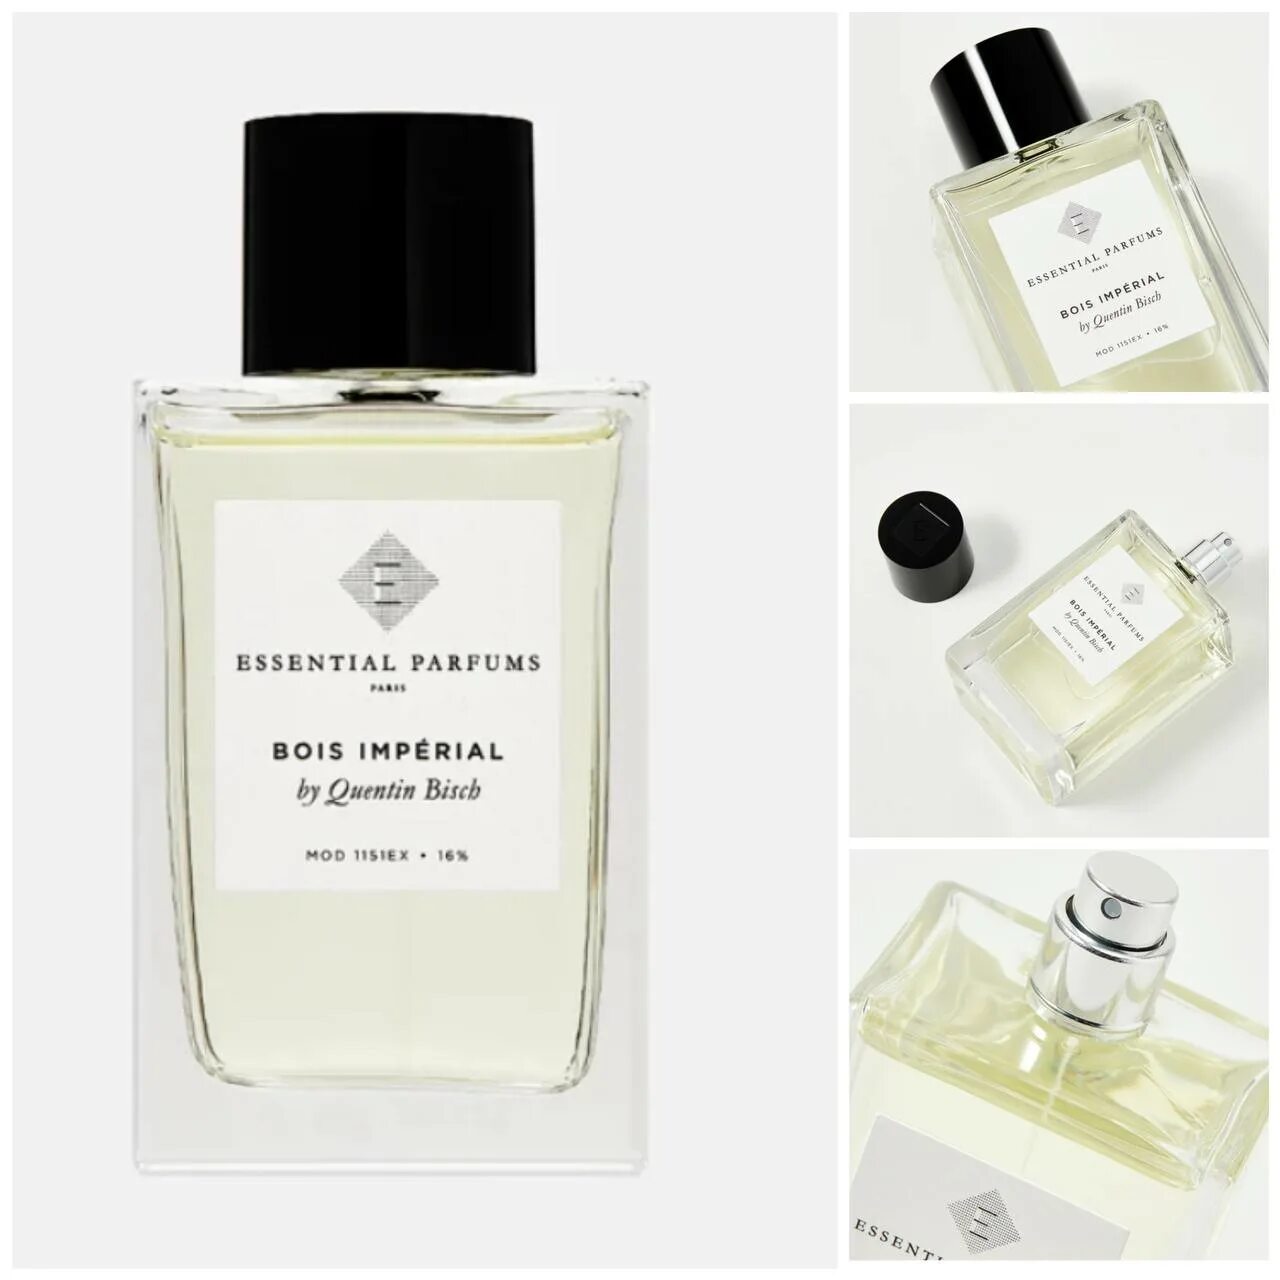 Bois imperial refillable limited edition. Quentin bisch bois Imperial Essential Parfums. Essential Parfums Paris bois Imperial. Essential Parfums Paris bois Imperial Refillable диффузор. Essential Parfums bois Imperial by Quentin bisch EDP 10 ml.